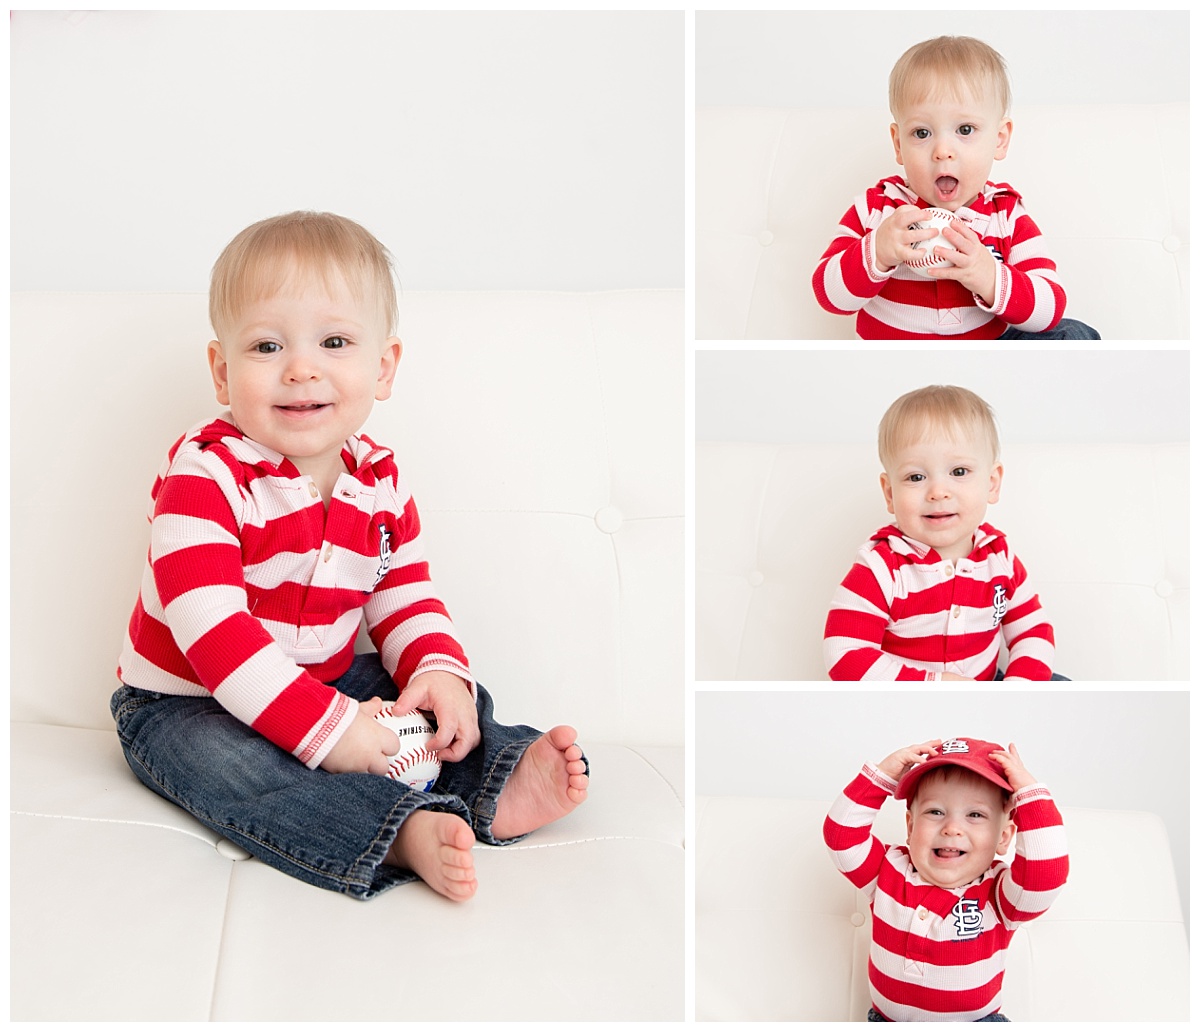 st-louis-family-photographer-one-year-boy-wearing-st-louis-cardinals-outfit.jpg